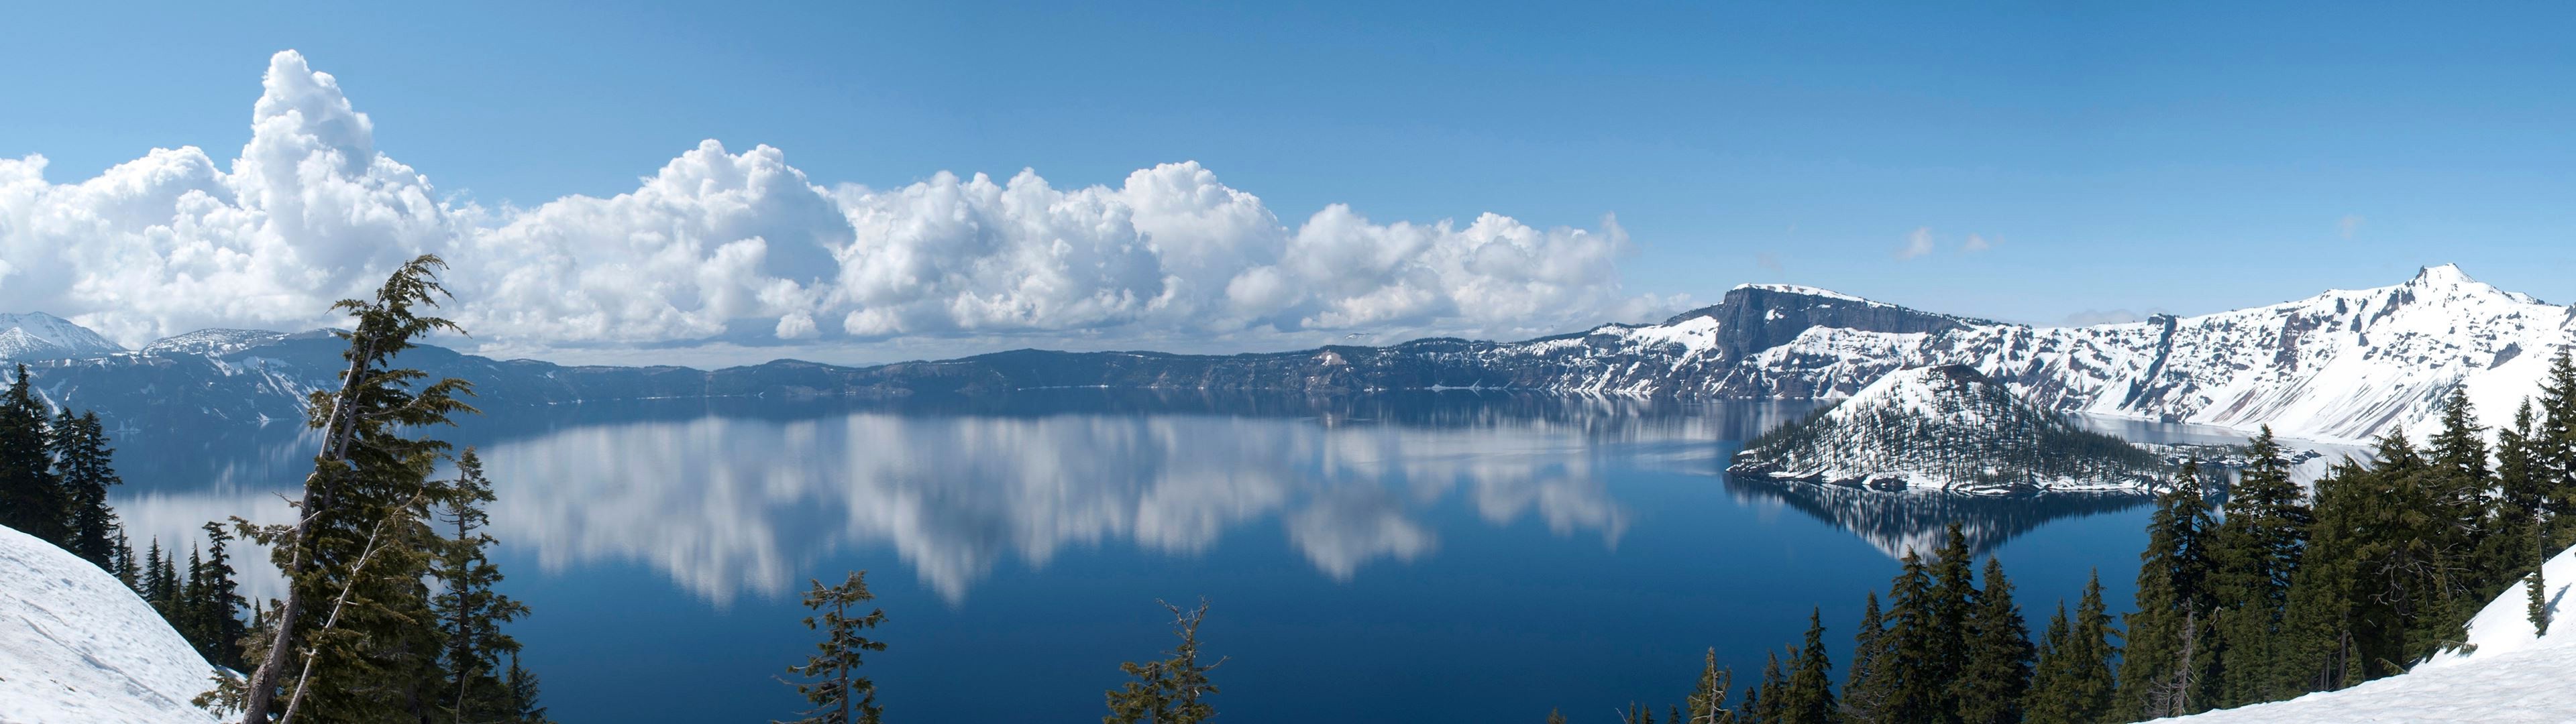 landscape, Lake, Crater Lake, Clouds, Reflection, Multiple Display, Snow Wallpapers HD